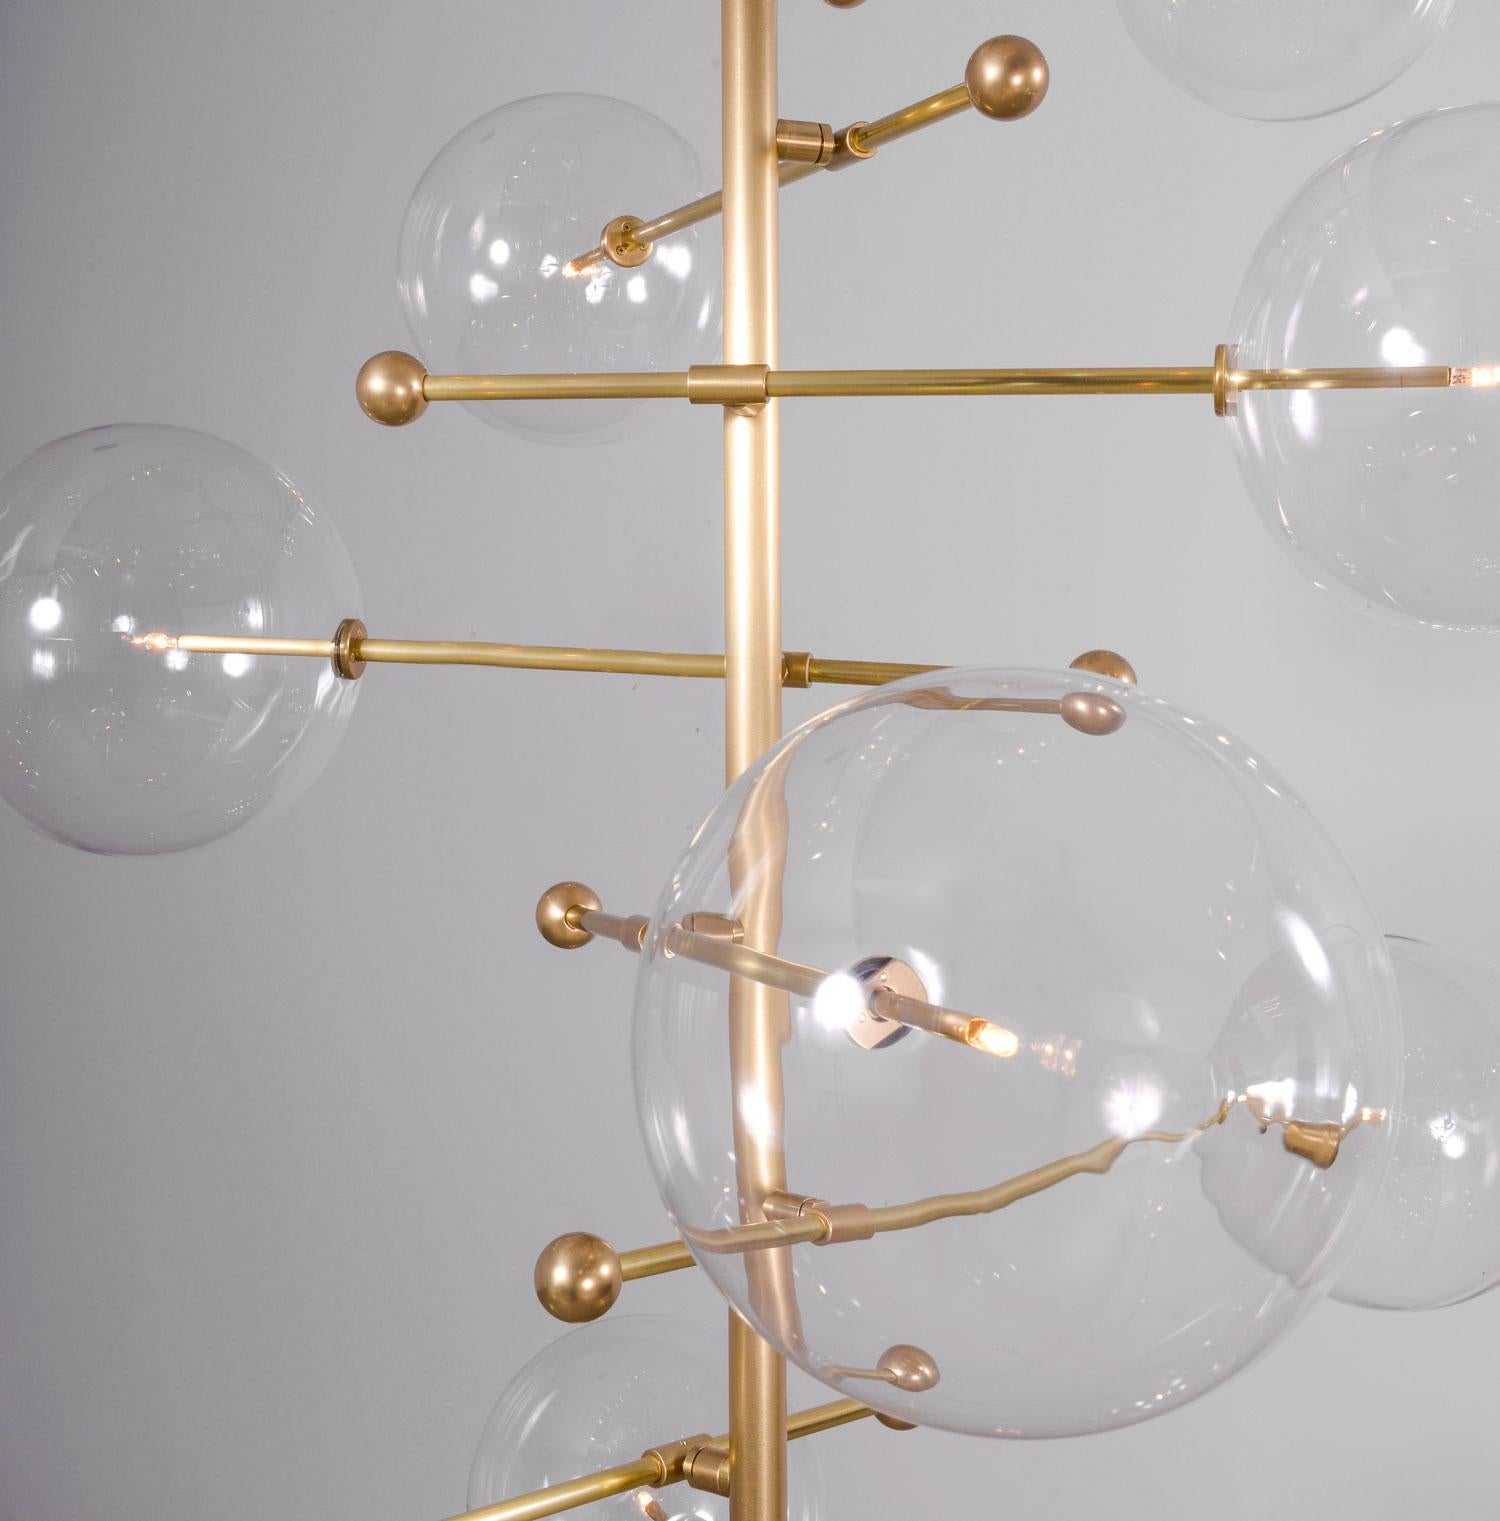 RD15 12 Arms Chandelier by Schwung
Dimensions: W 140 x D 140 x H 290
Materials: Solid Brass, Hand Blown Glass Globes
 
Schwung is a german word, and loosely defined, means energy or momentumm of a positive manner. synonyms: verve, zest, panache,